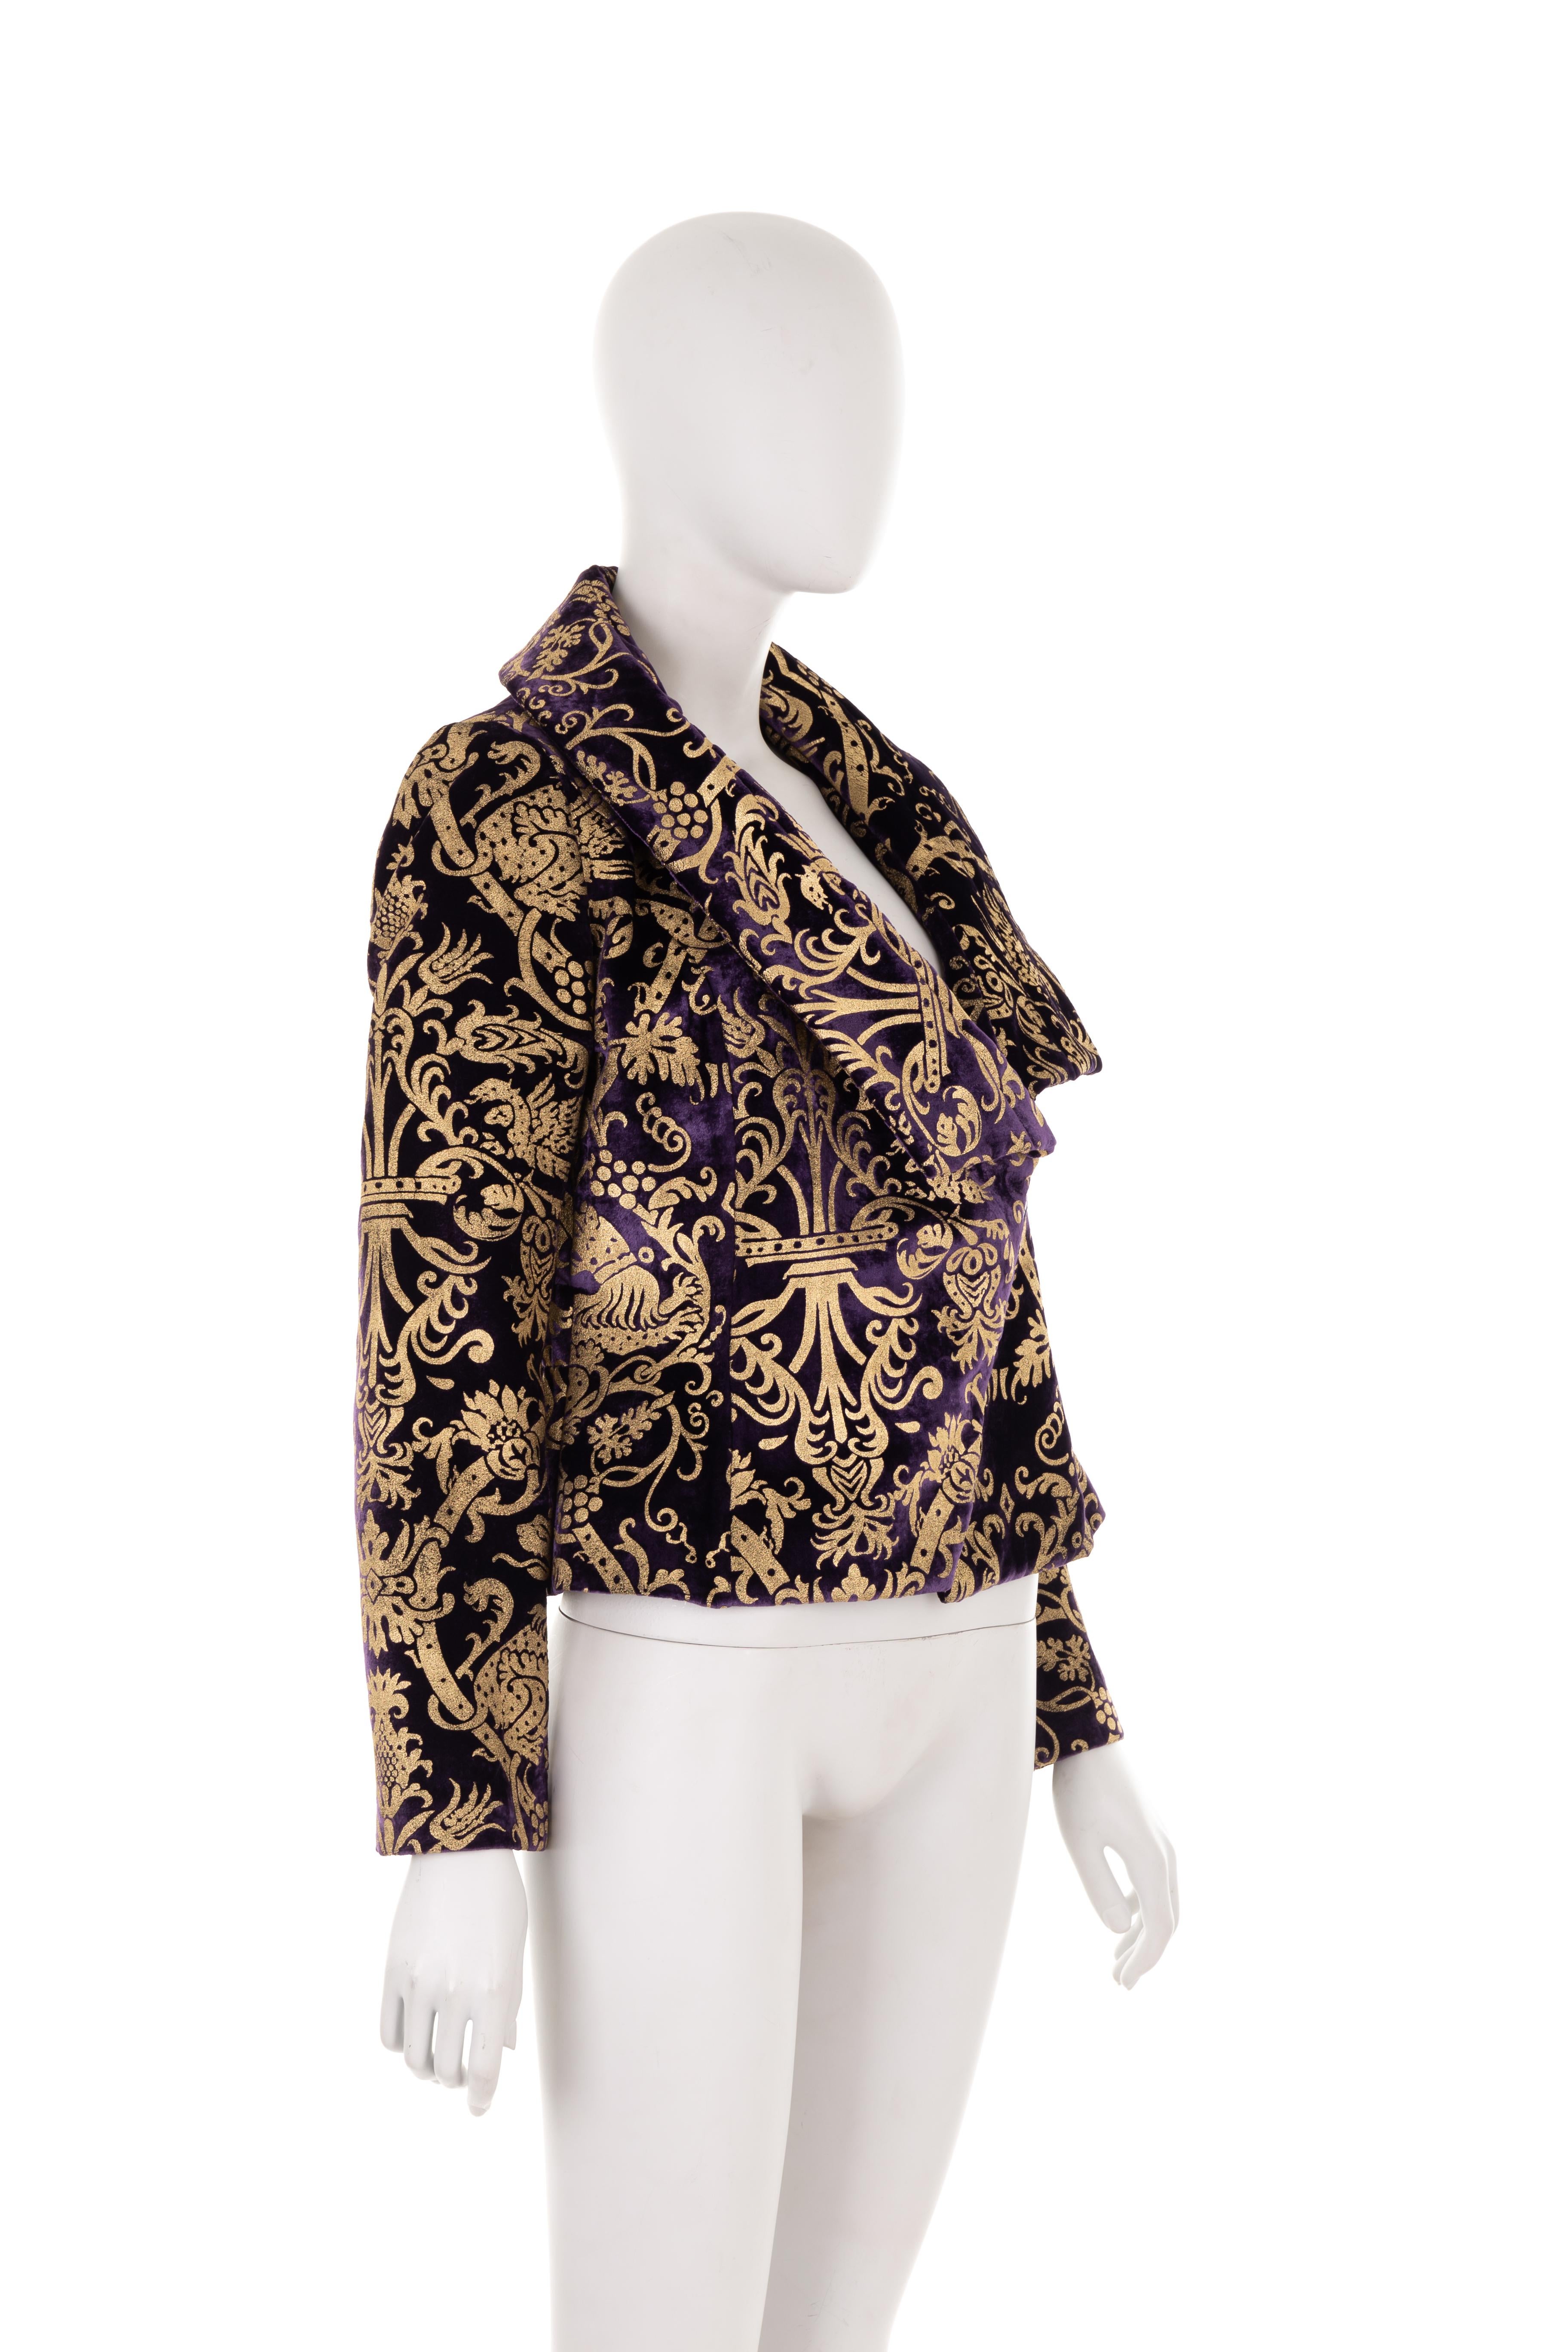 - Roberto Cavalli Fall Winter 2006 collection
- Sold by Gold Palms Vintage
- Purple velvet long sleeve jacket
- Asymmetric maxi collar
- Gold baroque motif
- Asymmetric front hook fastening with purple python detailing
- Cheetah print silk lining
-